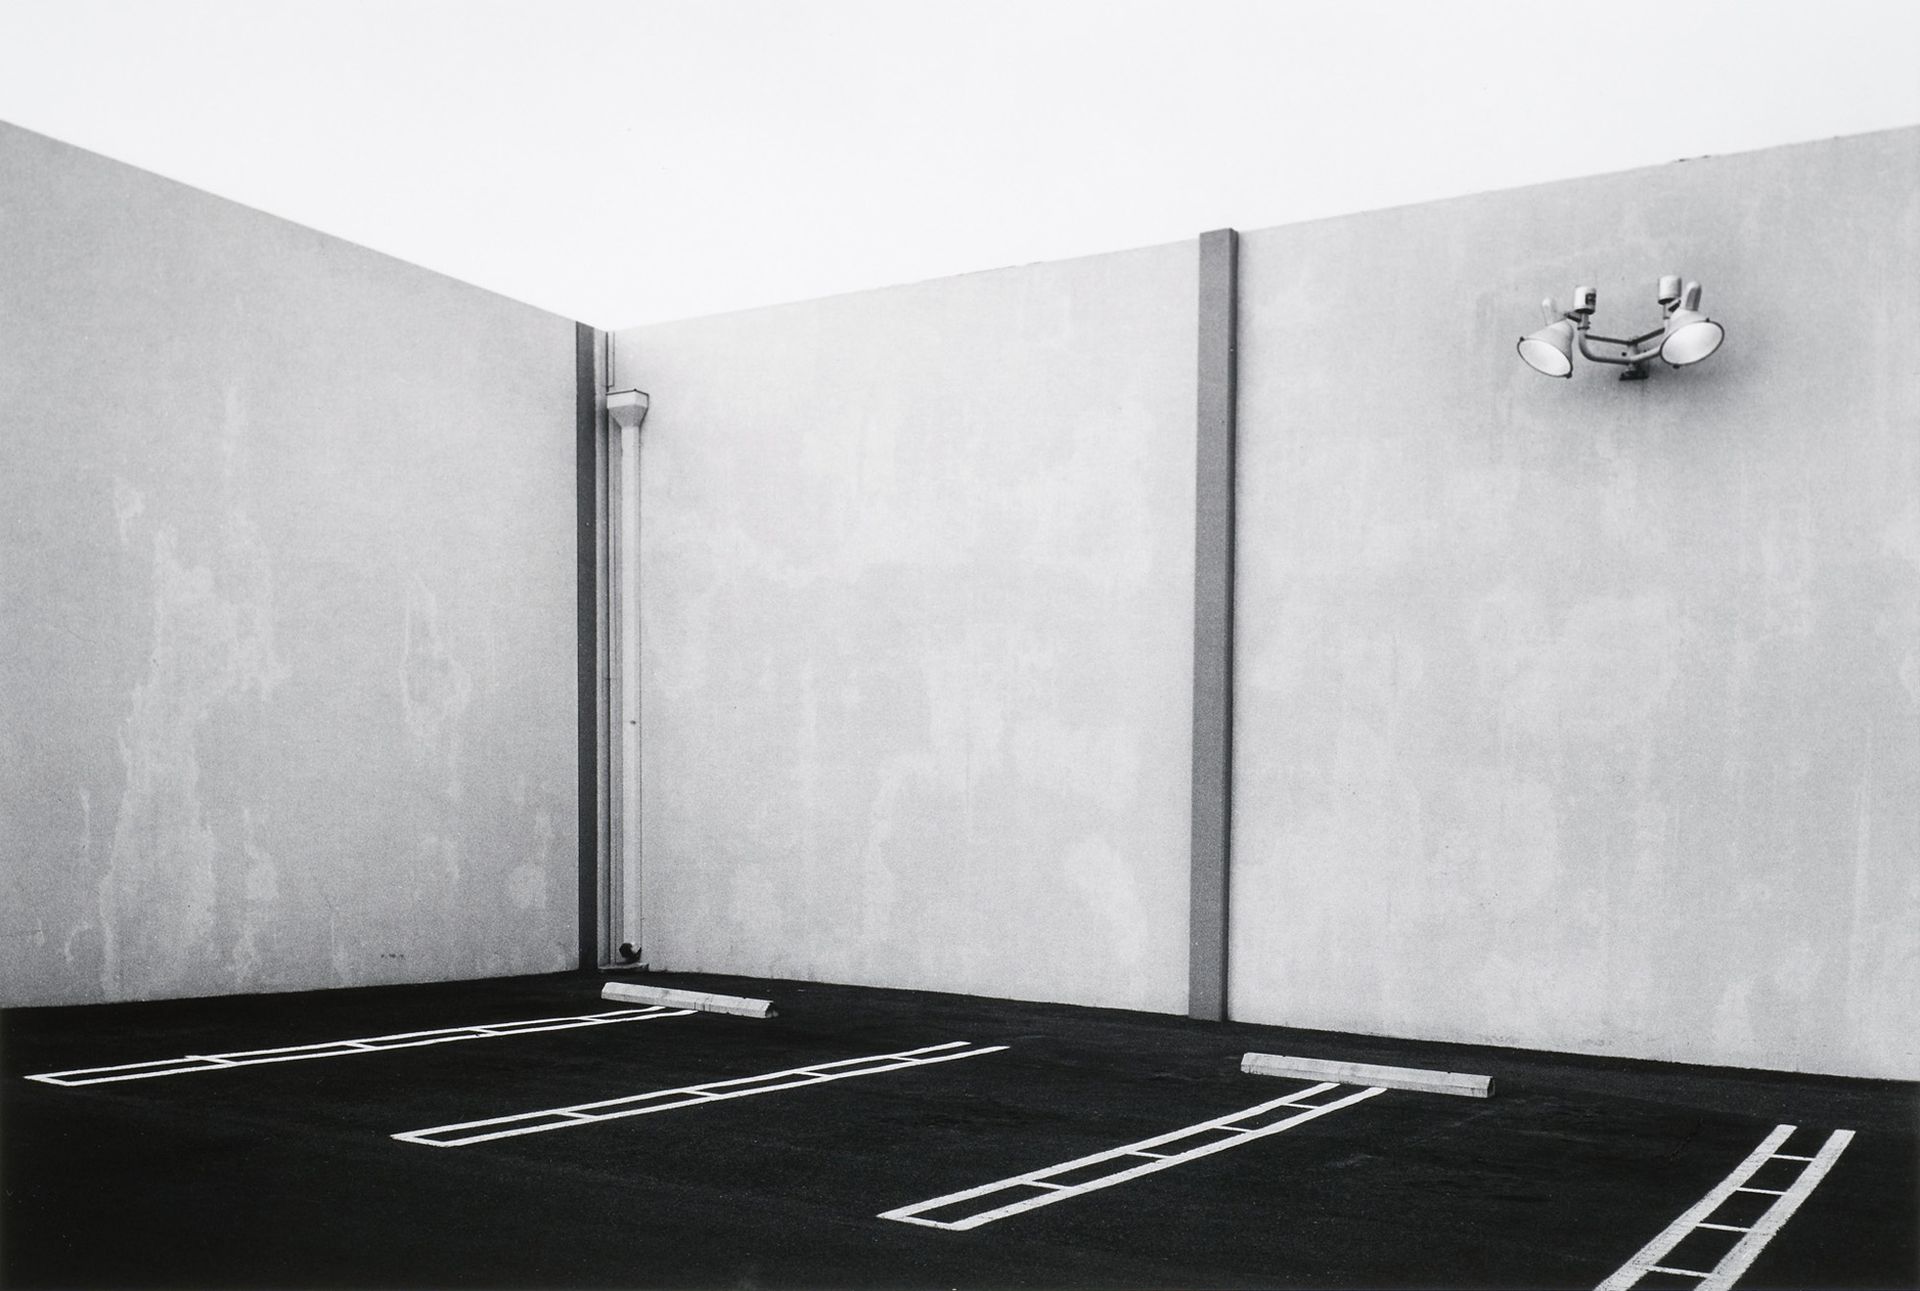 Lewis Baltz. South Corner, Parking Area, 23831 El Toro Road, El Toro. 1974.From the series The New Industrial Parks Near Irvine, California. 